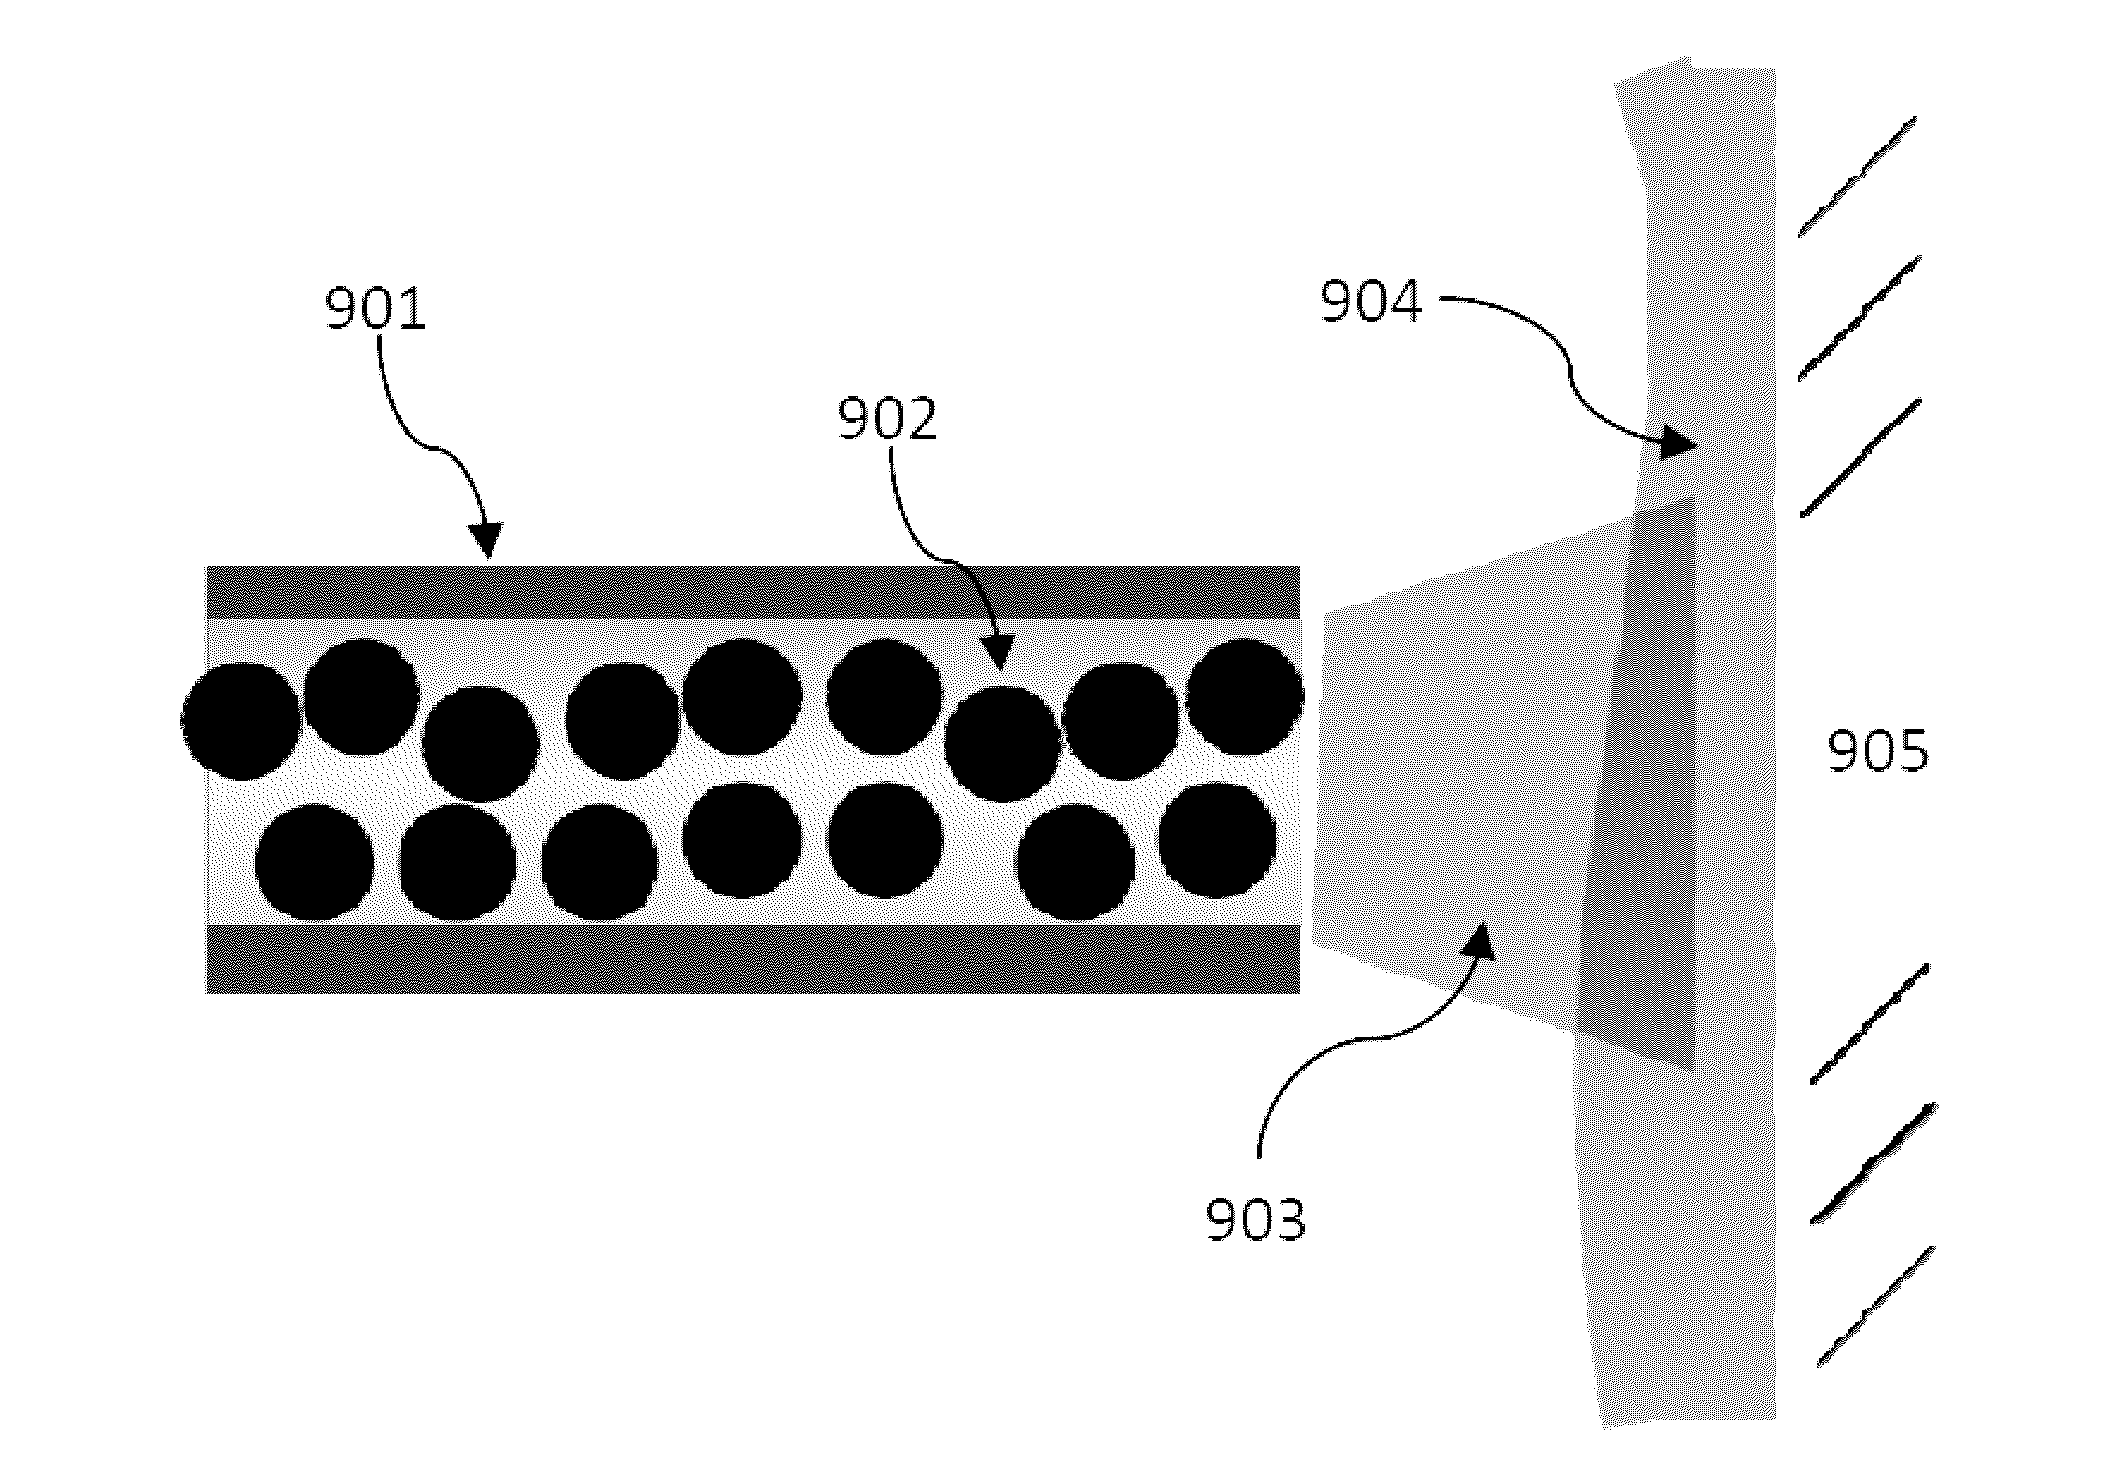 Fine grained ni-based alloys for resistance to stress corrosion cracking and methods for their design